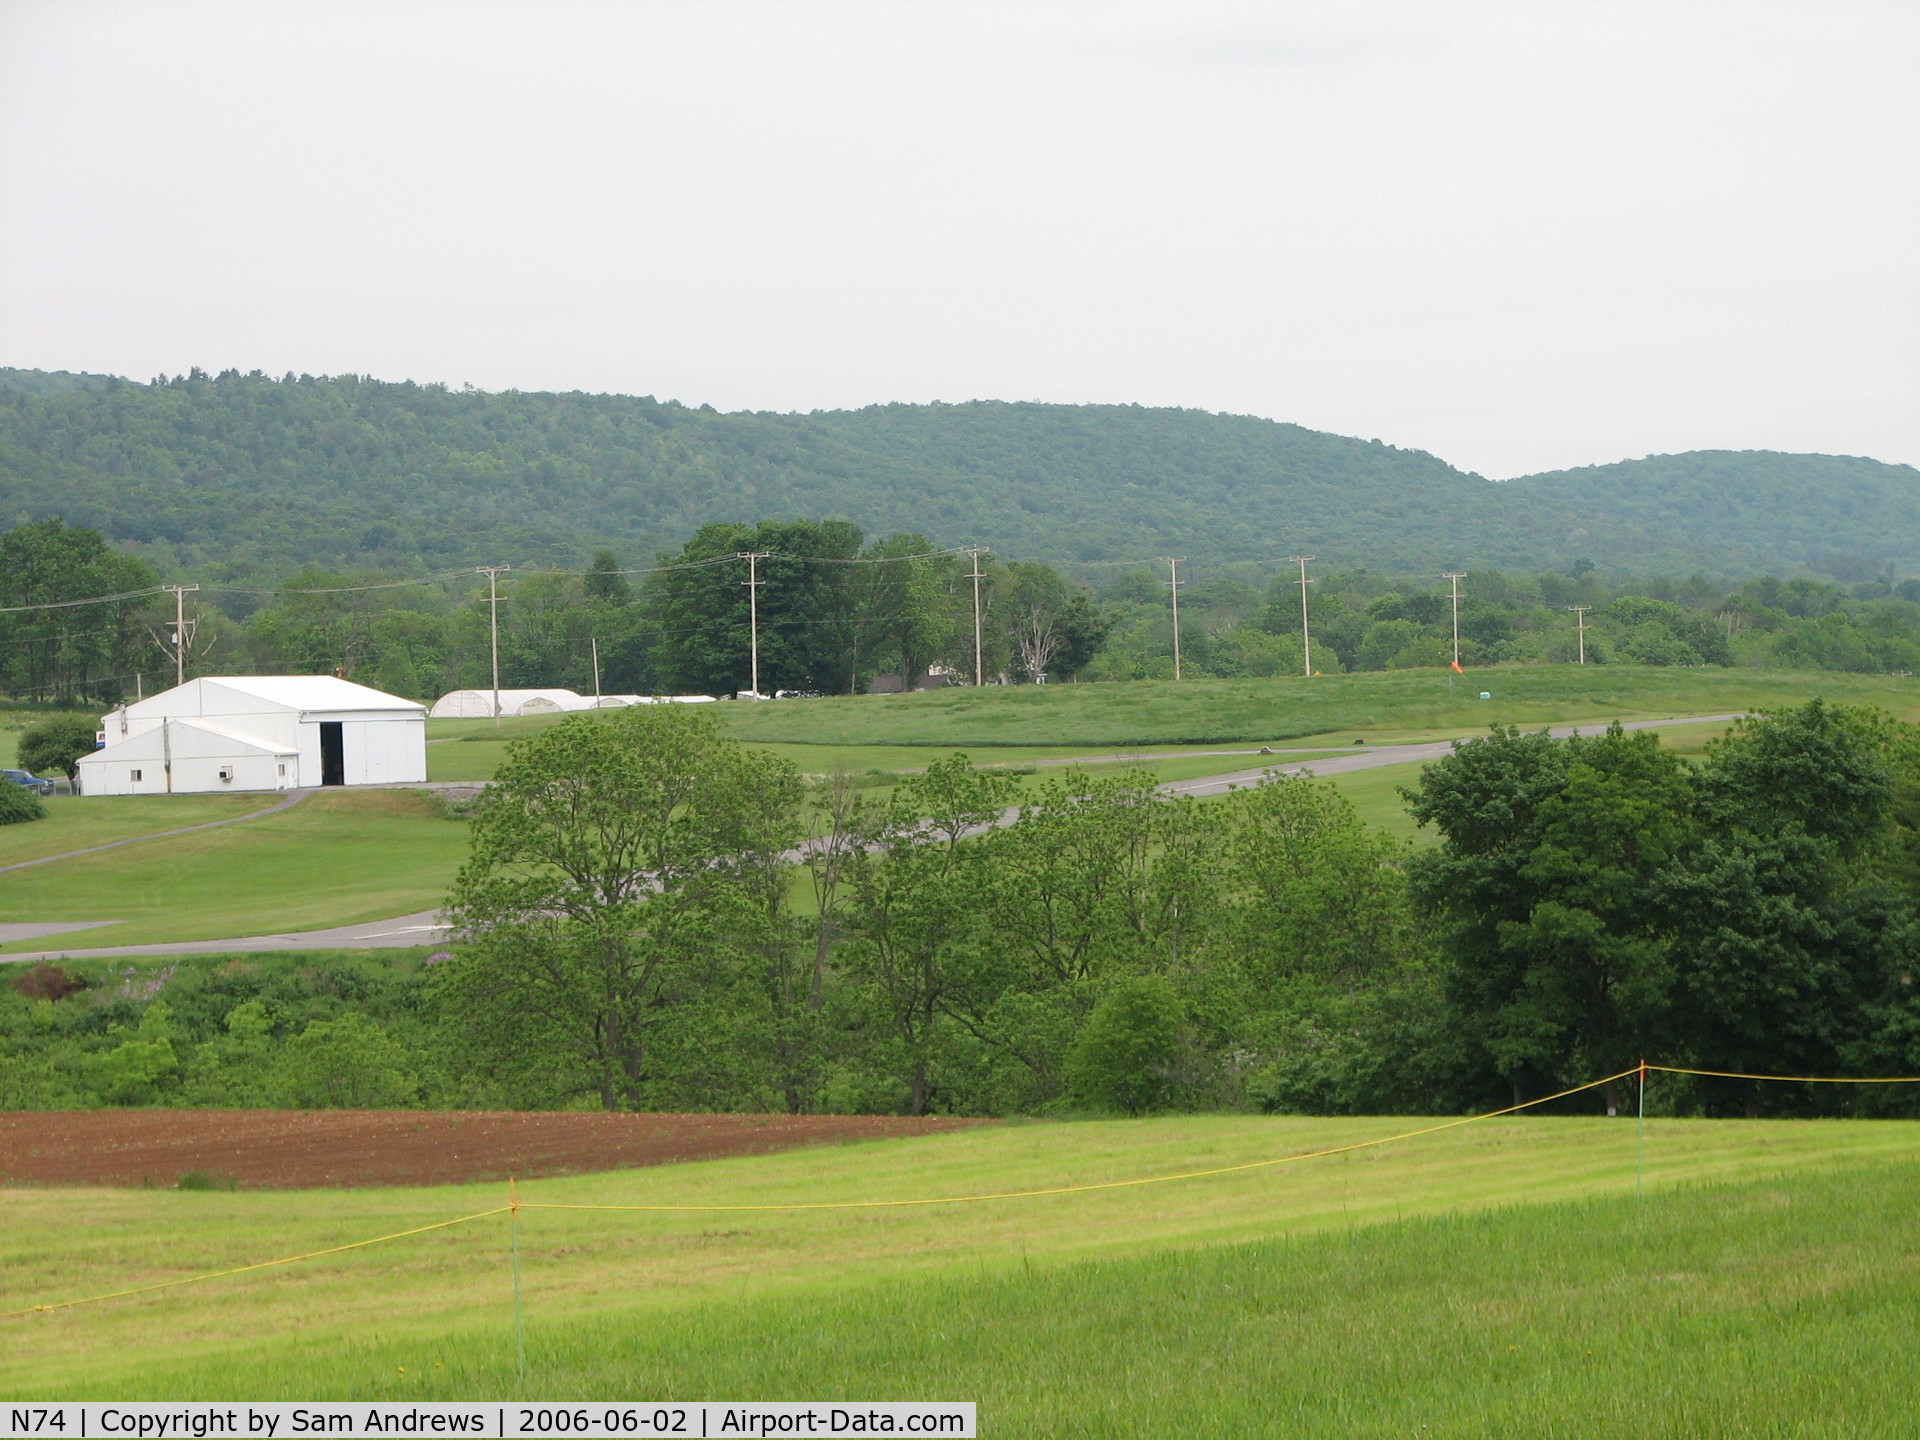 Penns Cave Airport (N74) - from a bit higher elevation